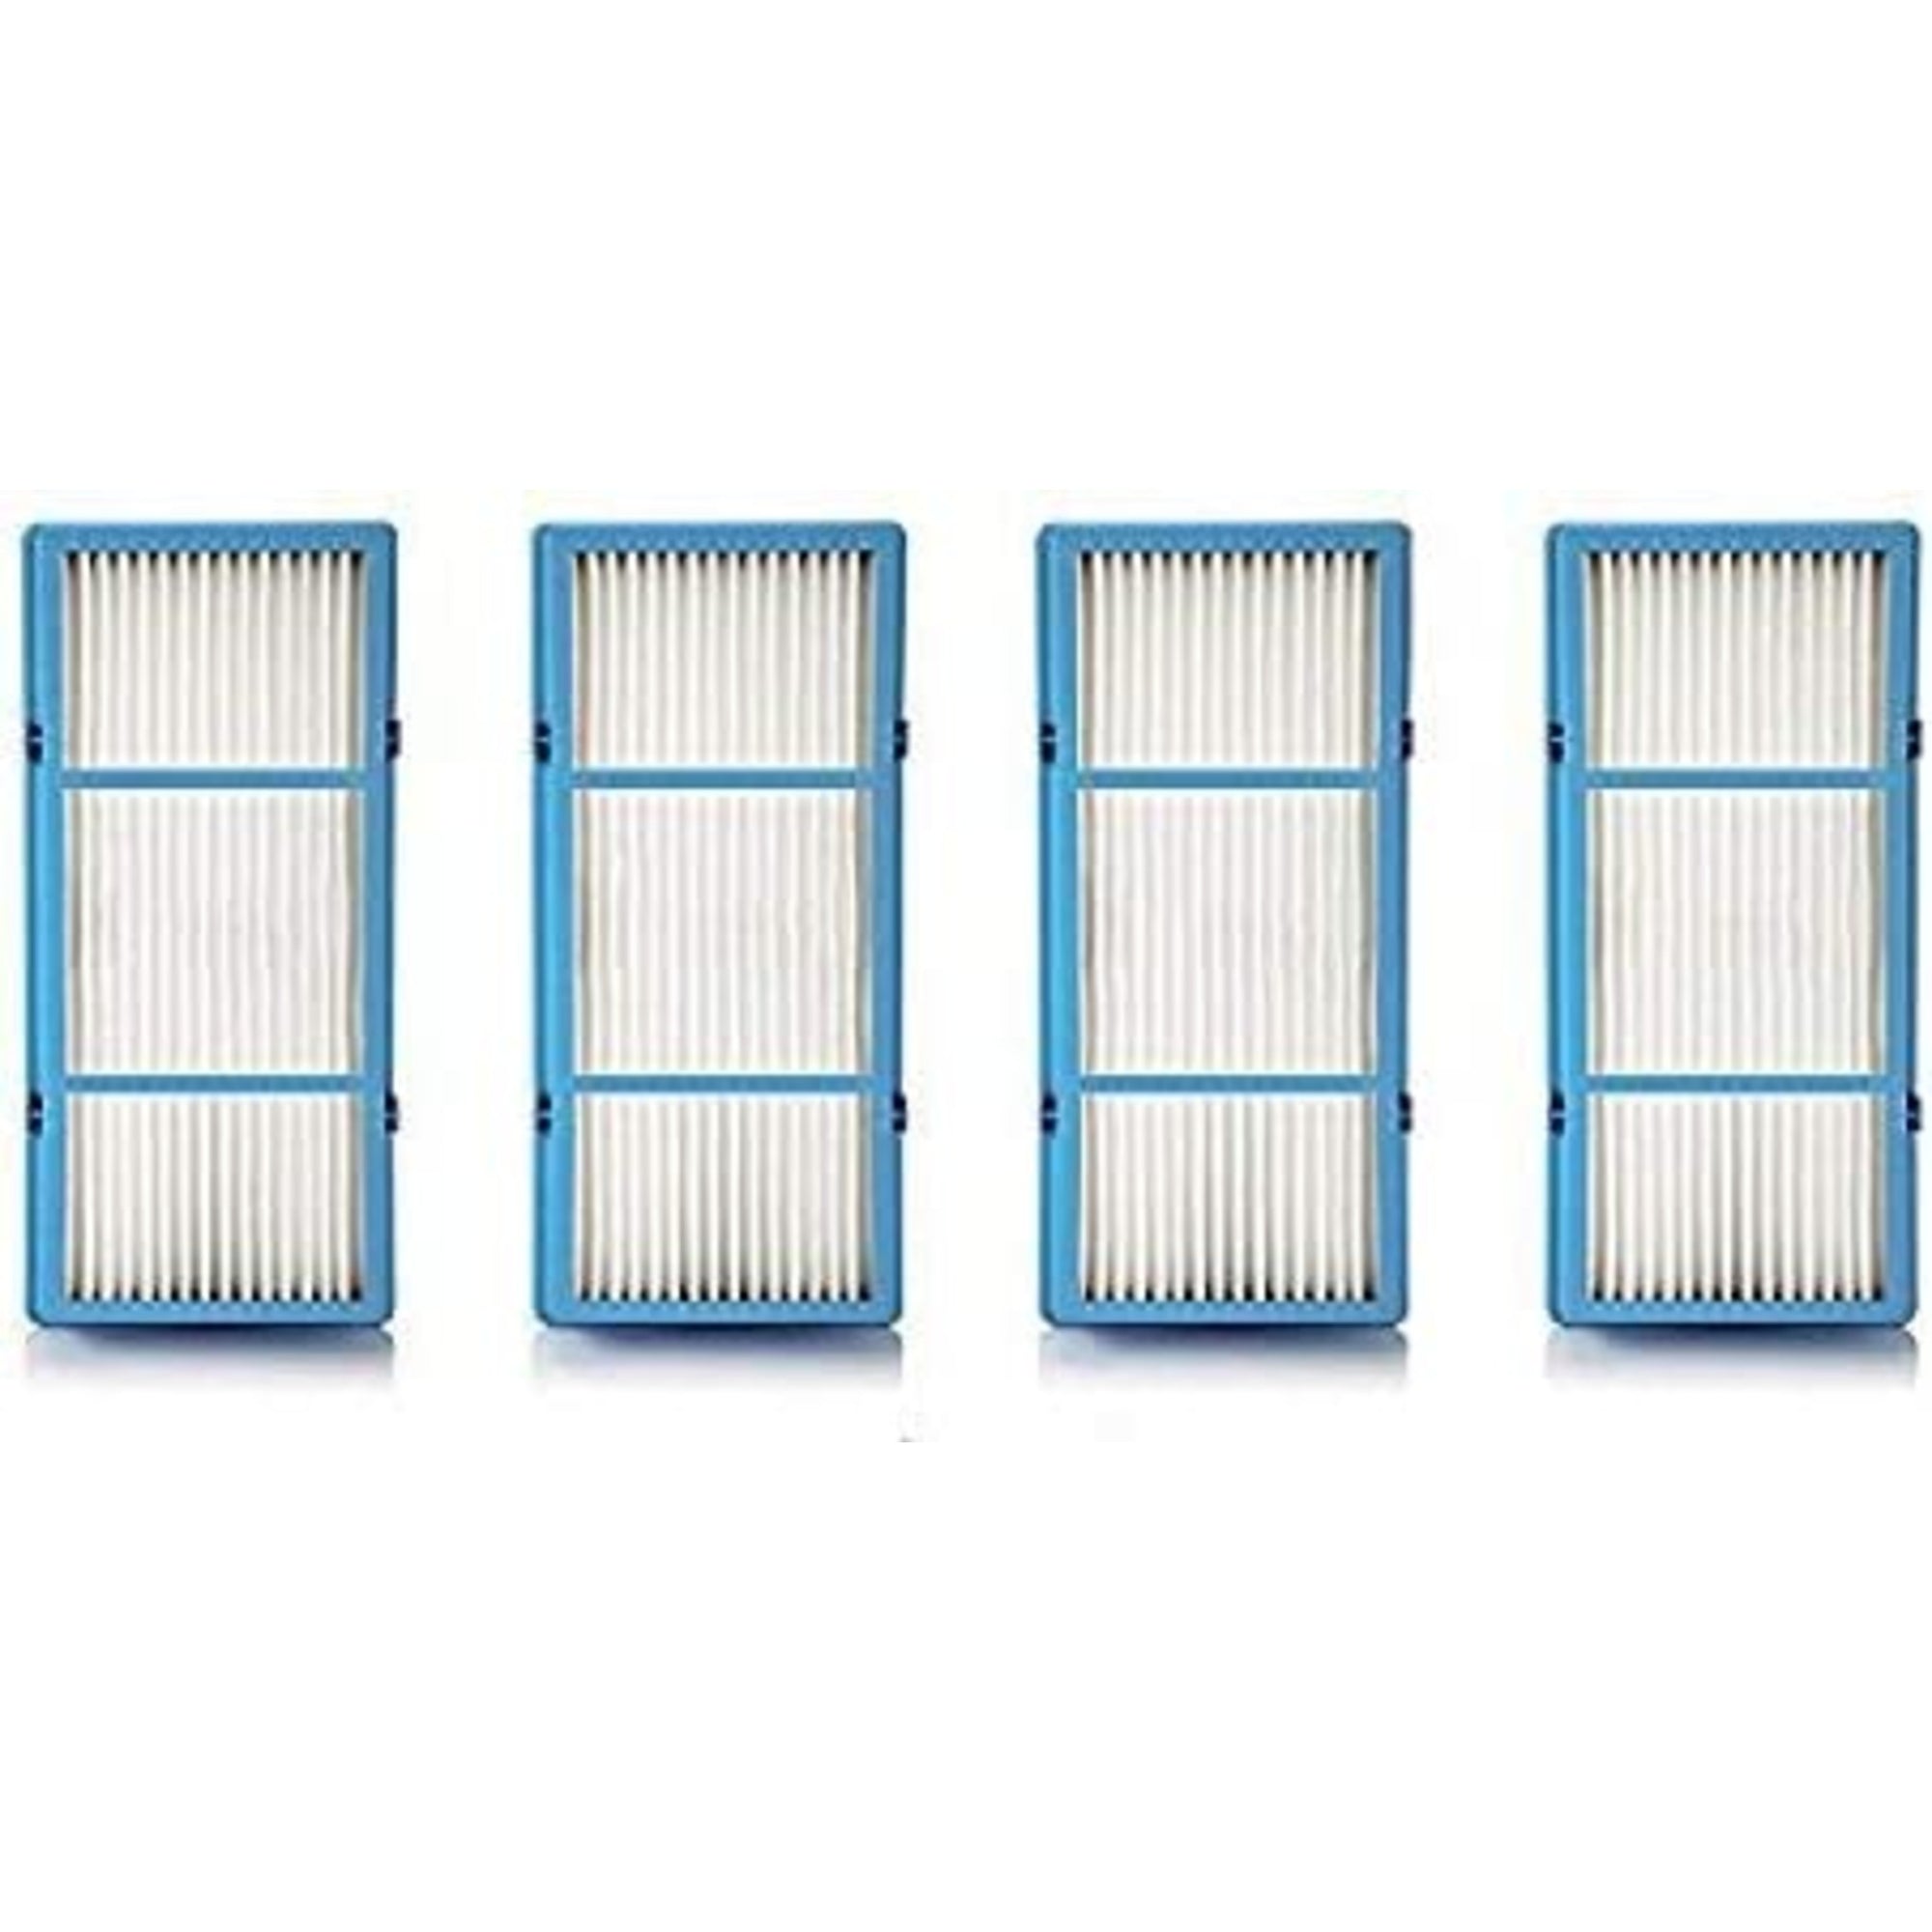 Nispira Total Air True HEPA Filter Replacement Compatible with Holmes AER1 Air Purifier HAPF30AT